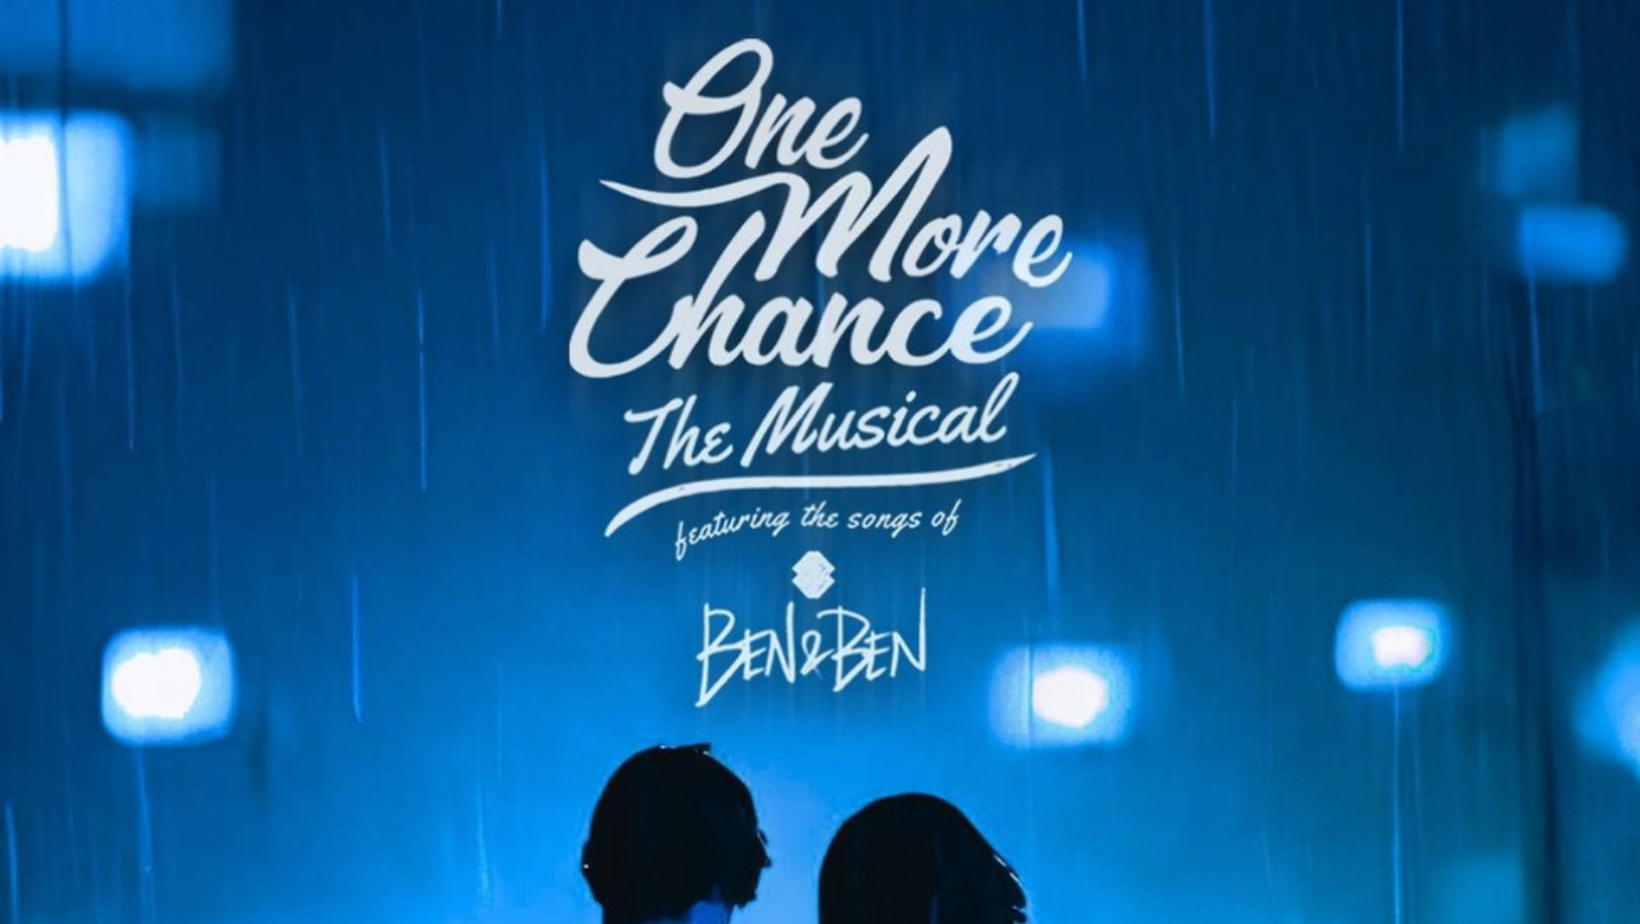 One More Chance musical